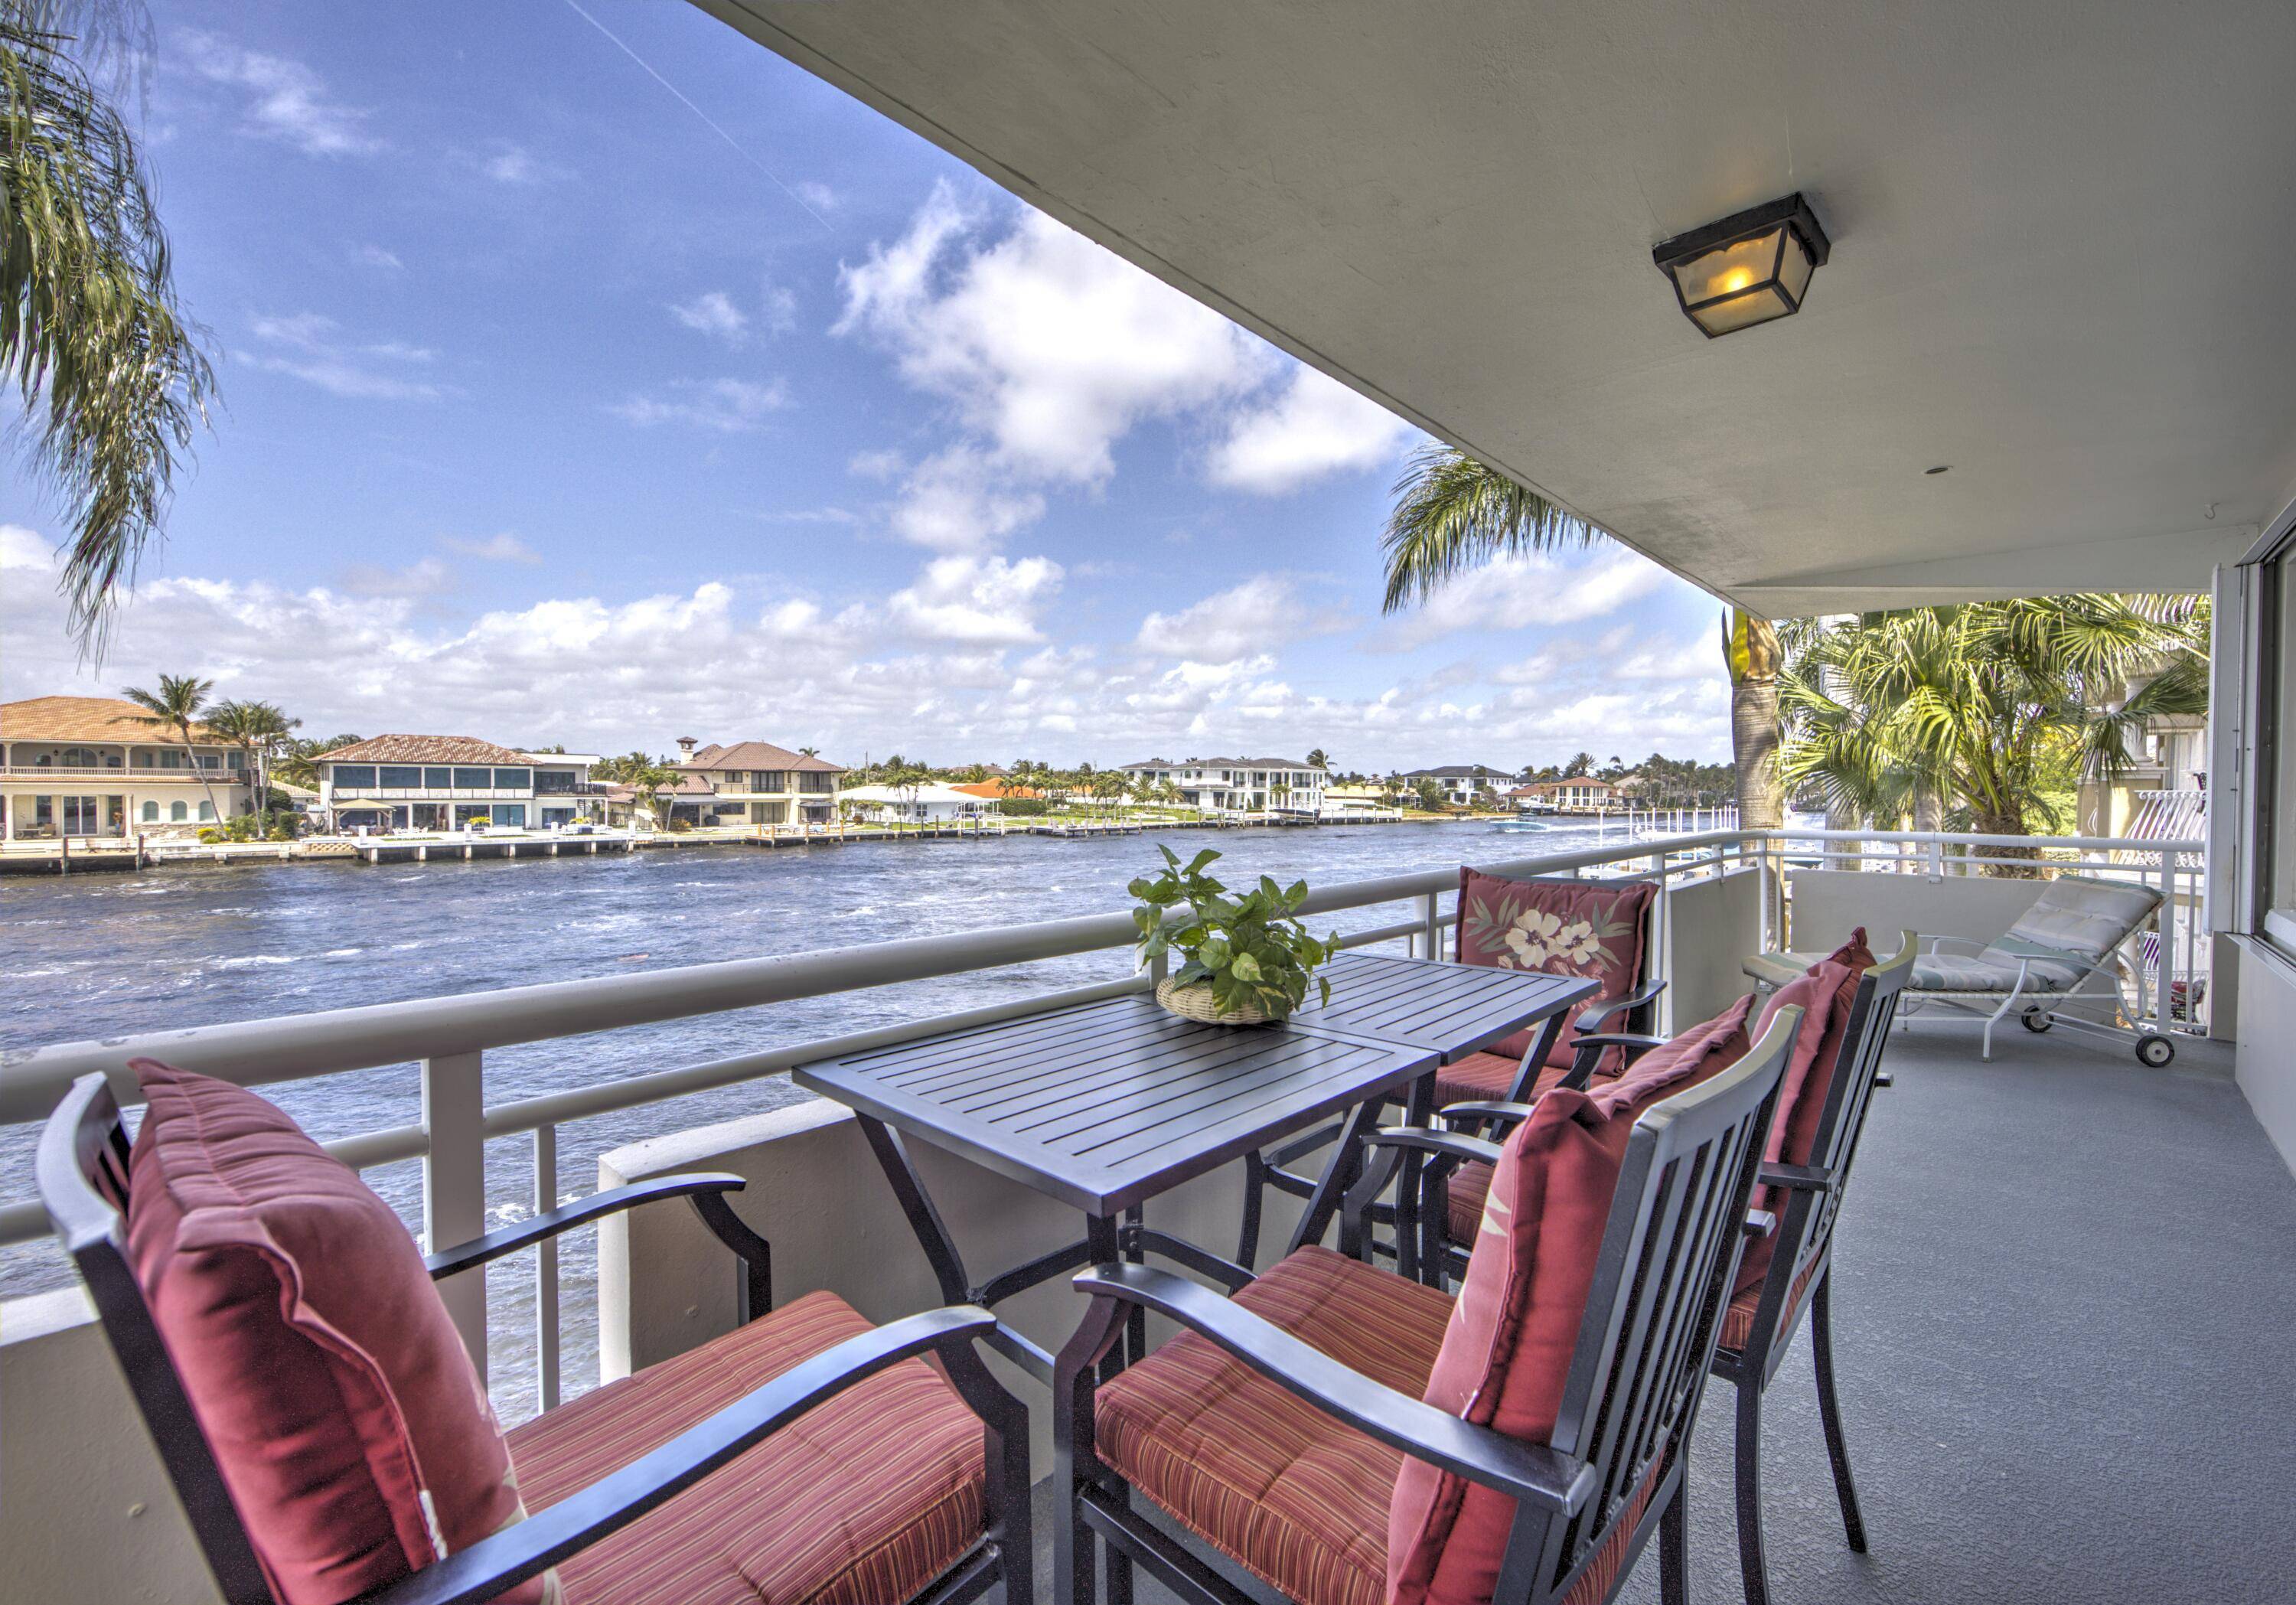 Front Row Waterfront ! Rarely available corner unit with direct waterfront, nothing to obscure the sweeping Westerly views of the intracoastal and beyond.